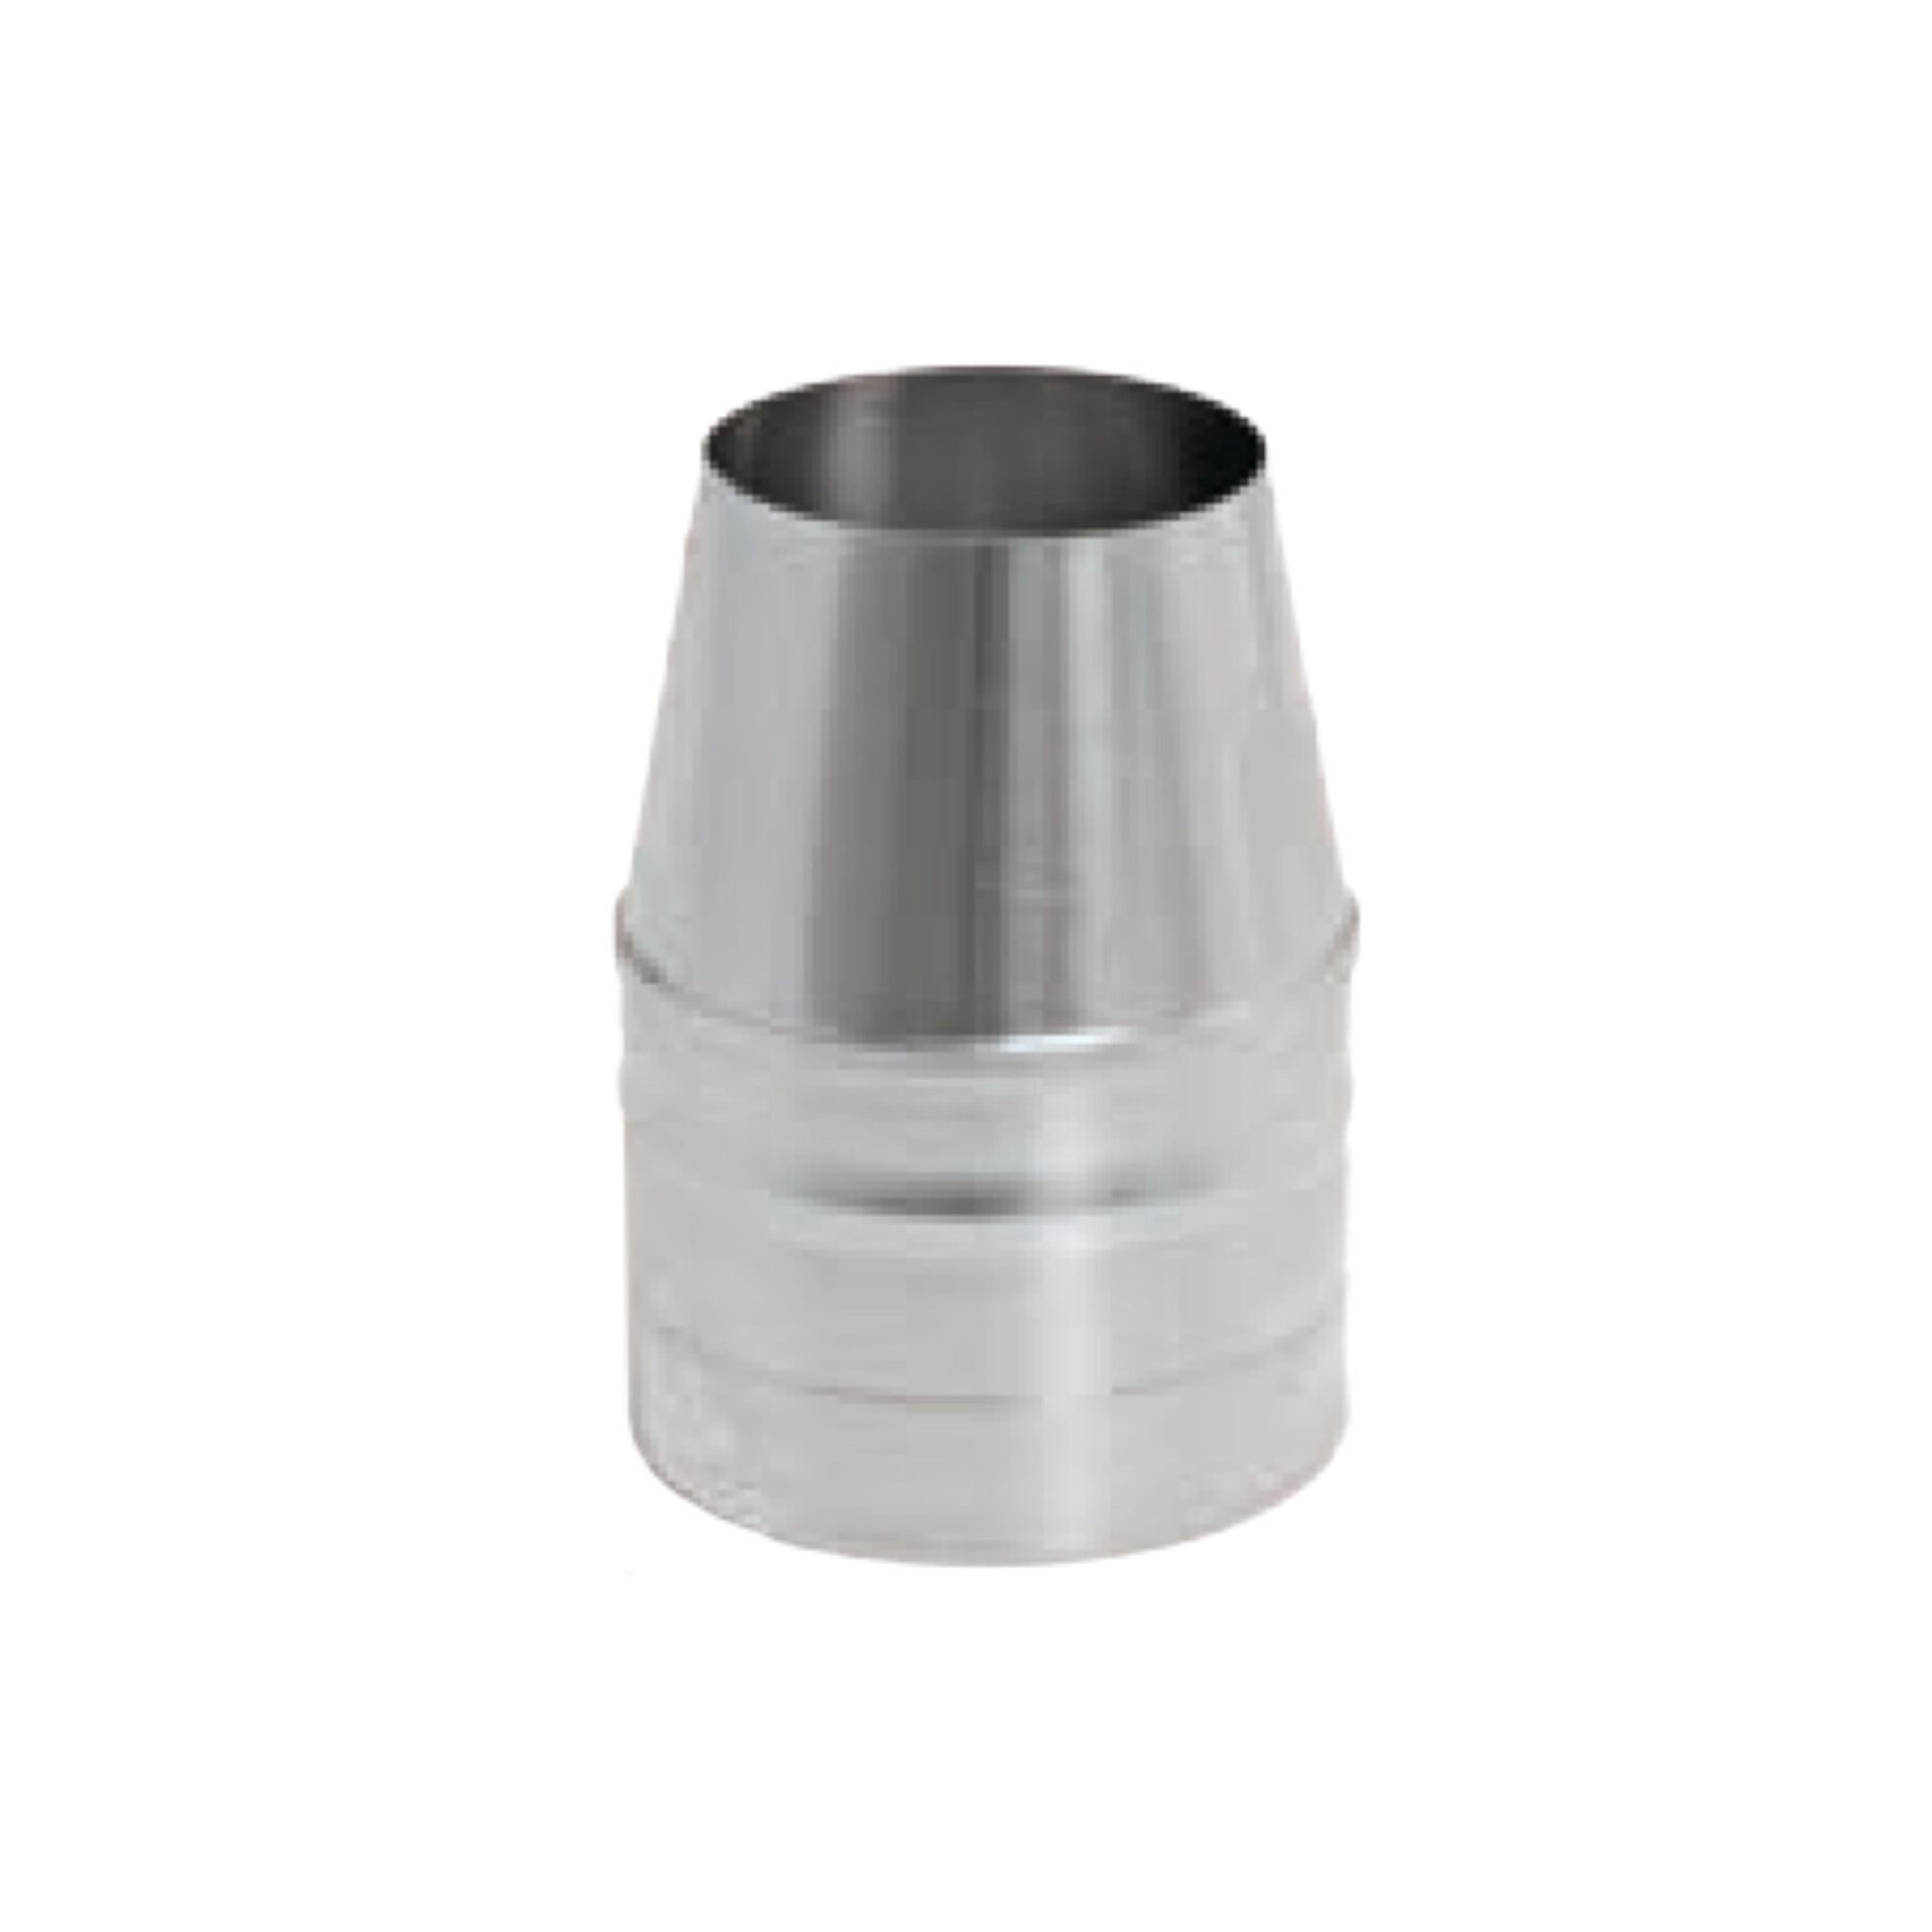 DuraVent FasNSeal 12" x 5" 316L Stainless Steel Termination Cone